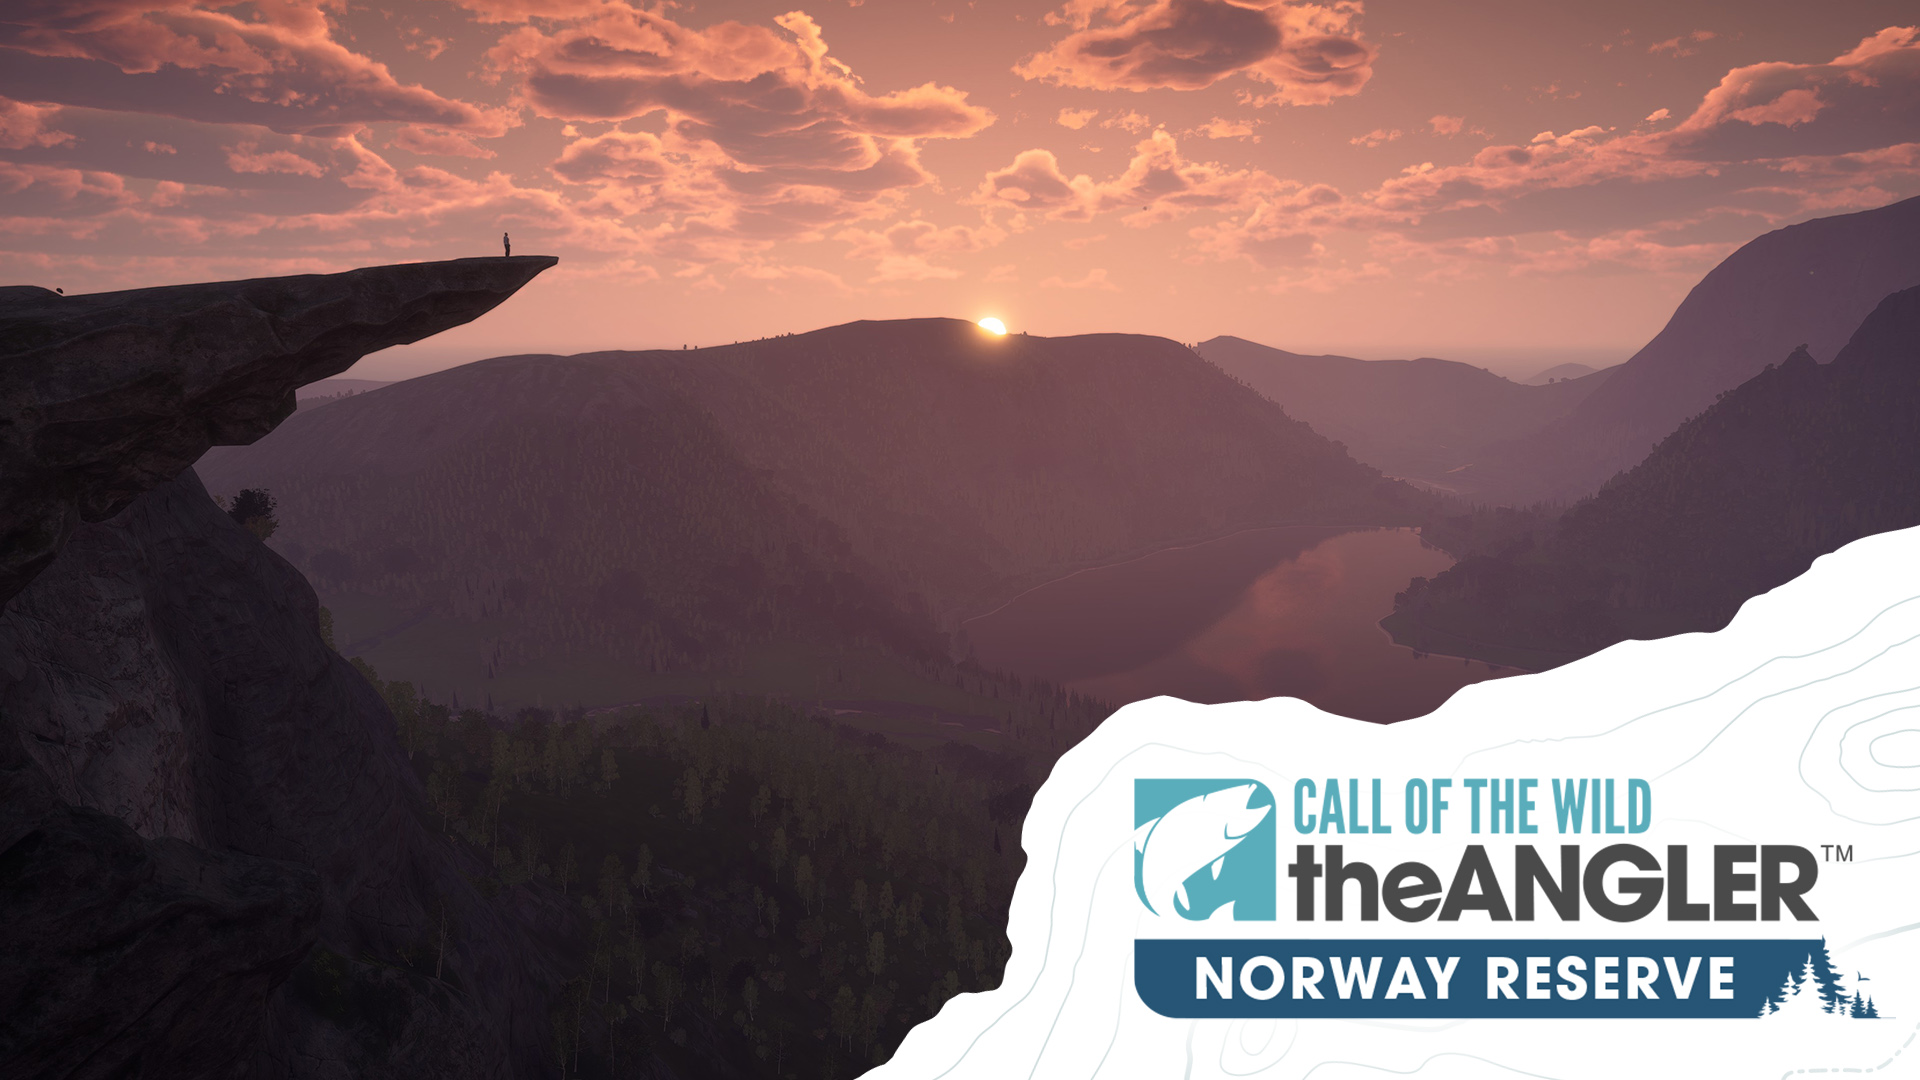 Norway Reserve is Available Now in Call of the Wild: The Angler